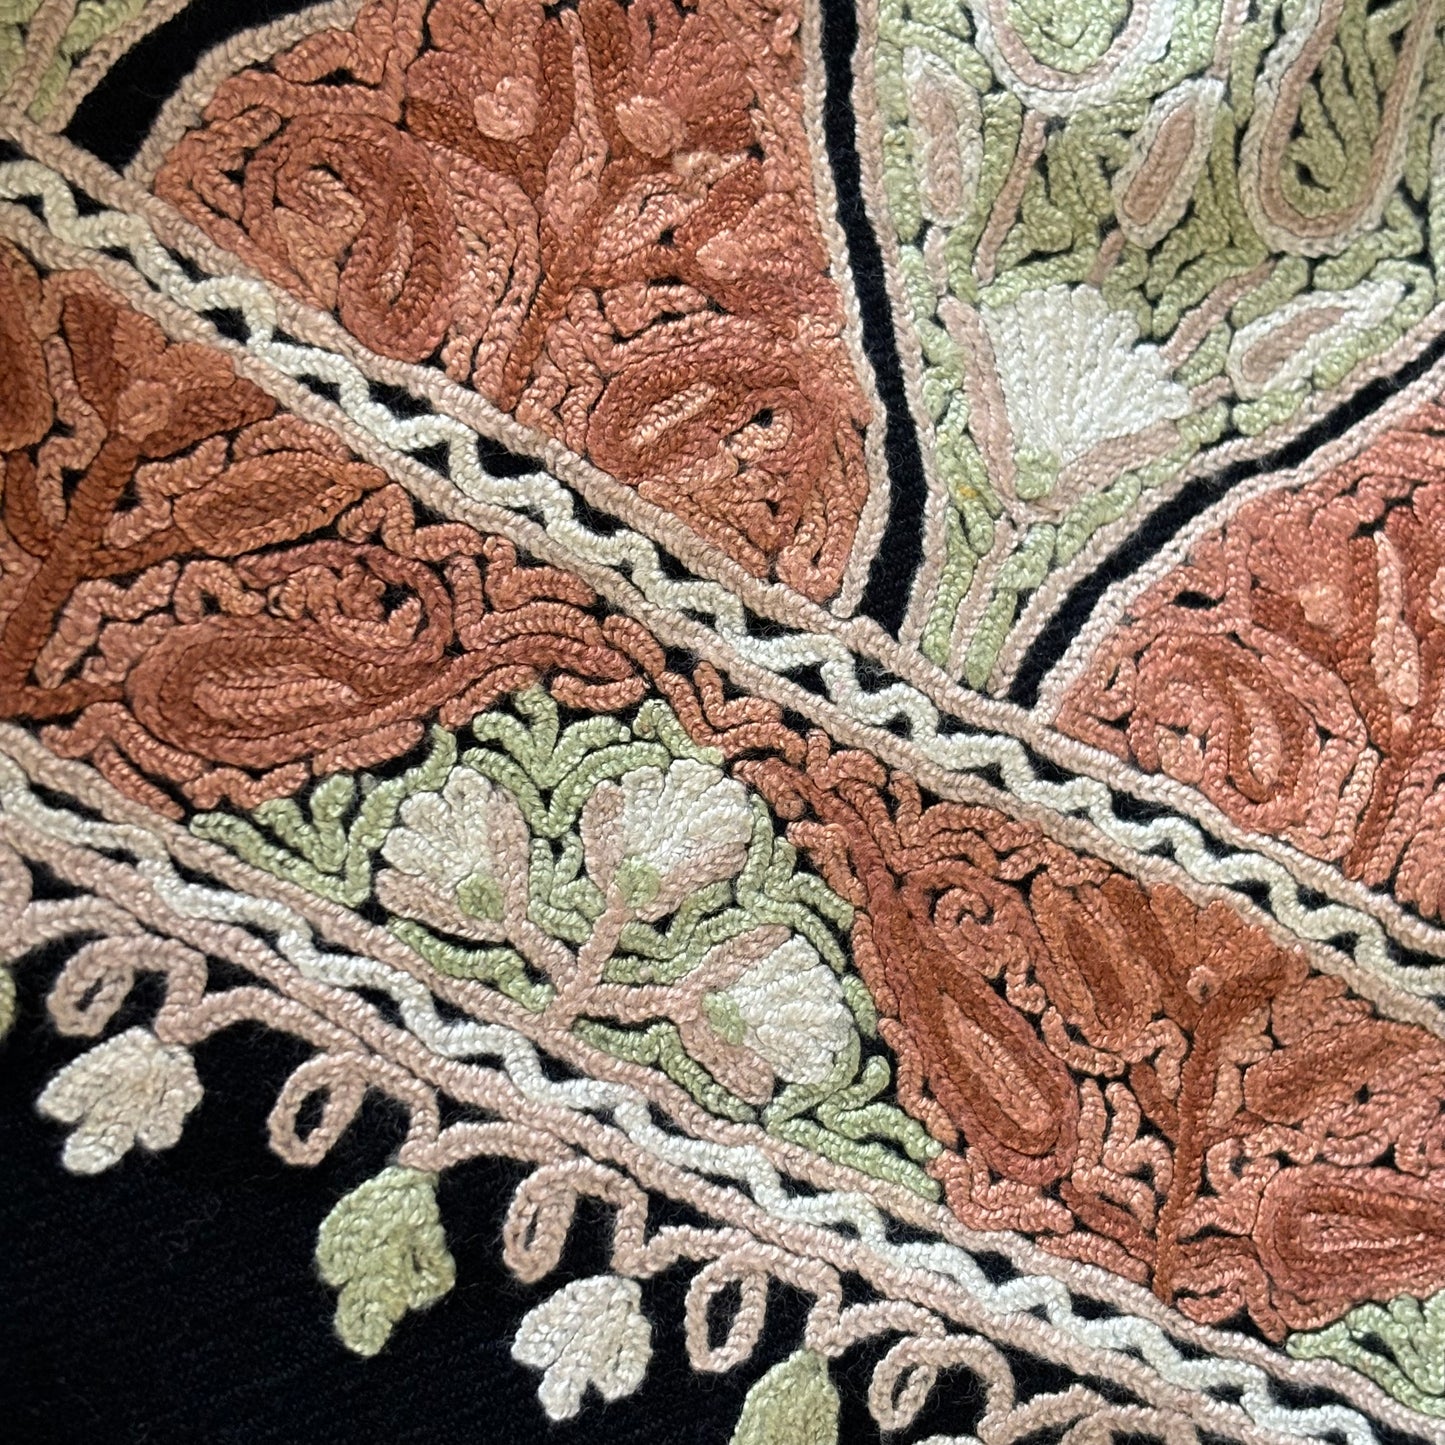 Shawl- Black color Woolen shawl with Light Green, Brown and White Aari embroidery